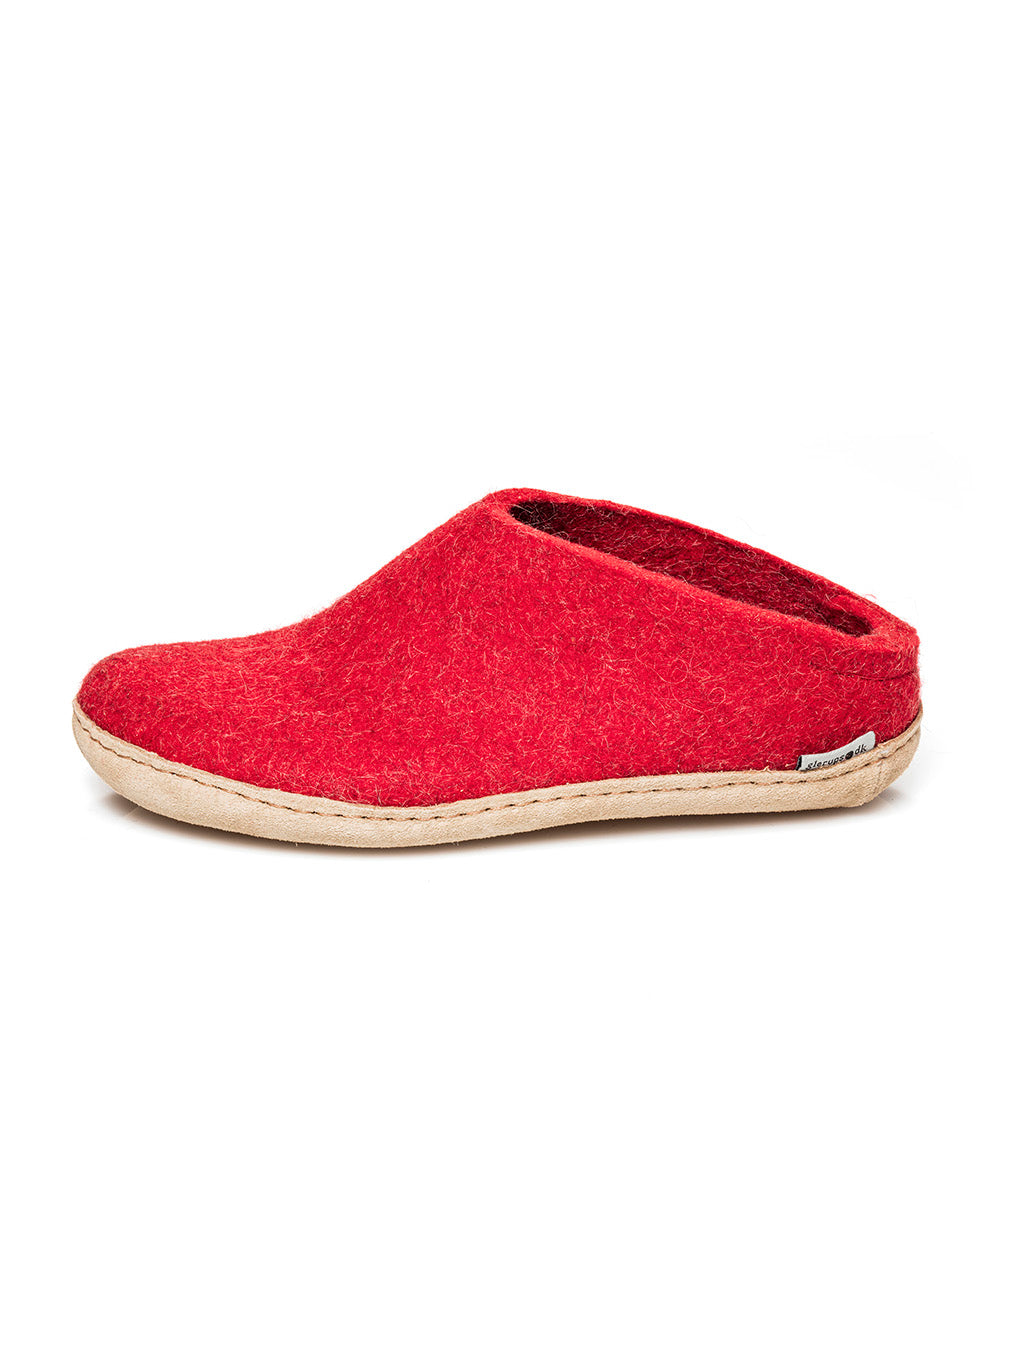 Red wool slipper with leather sole * size 35 *